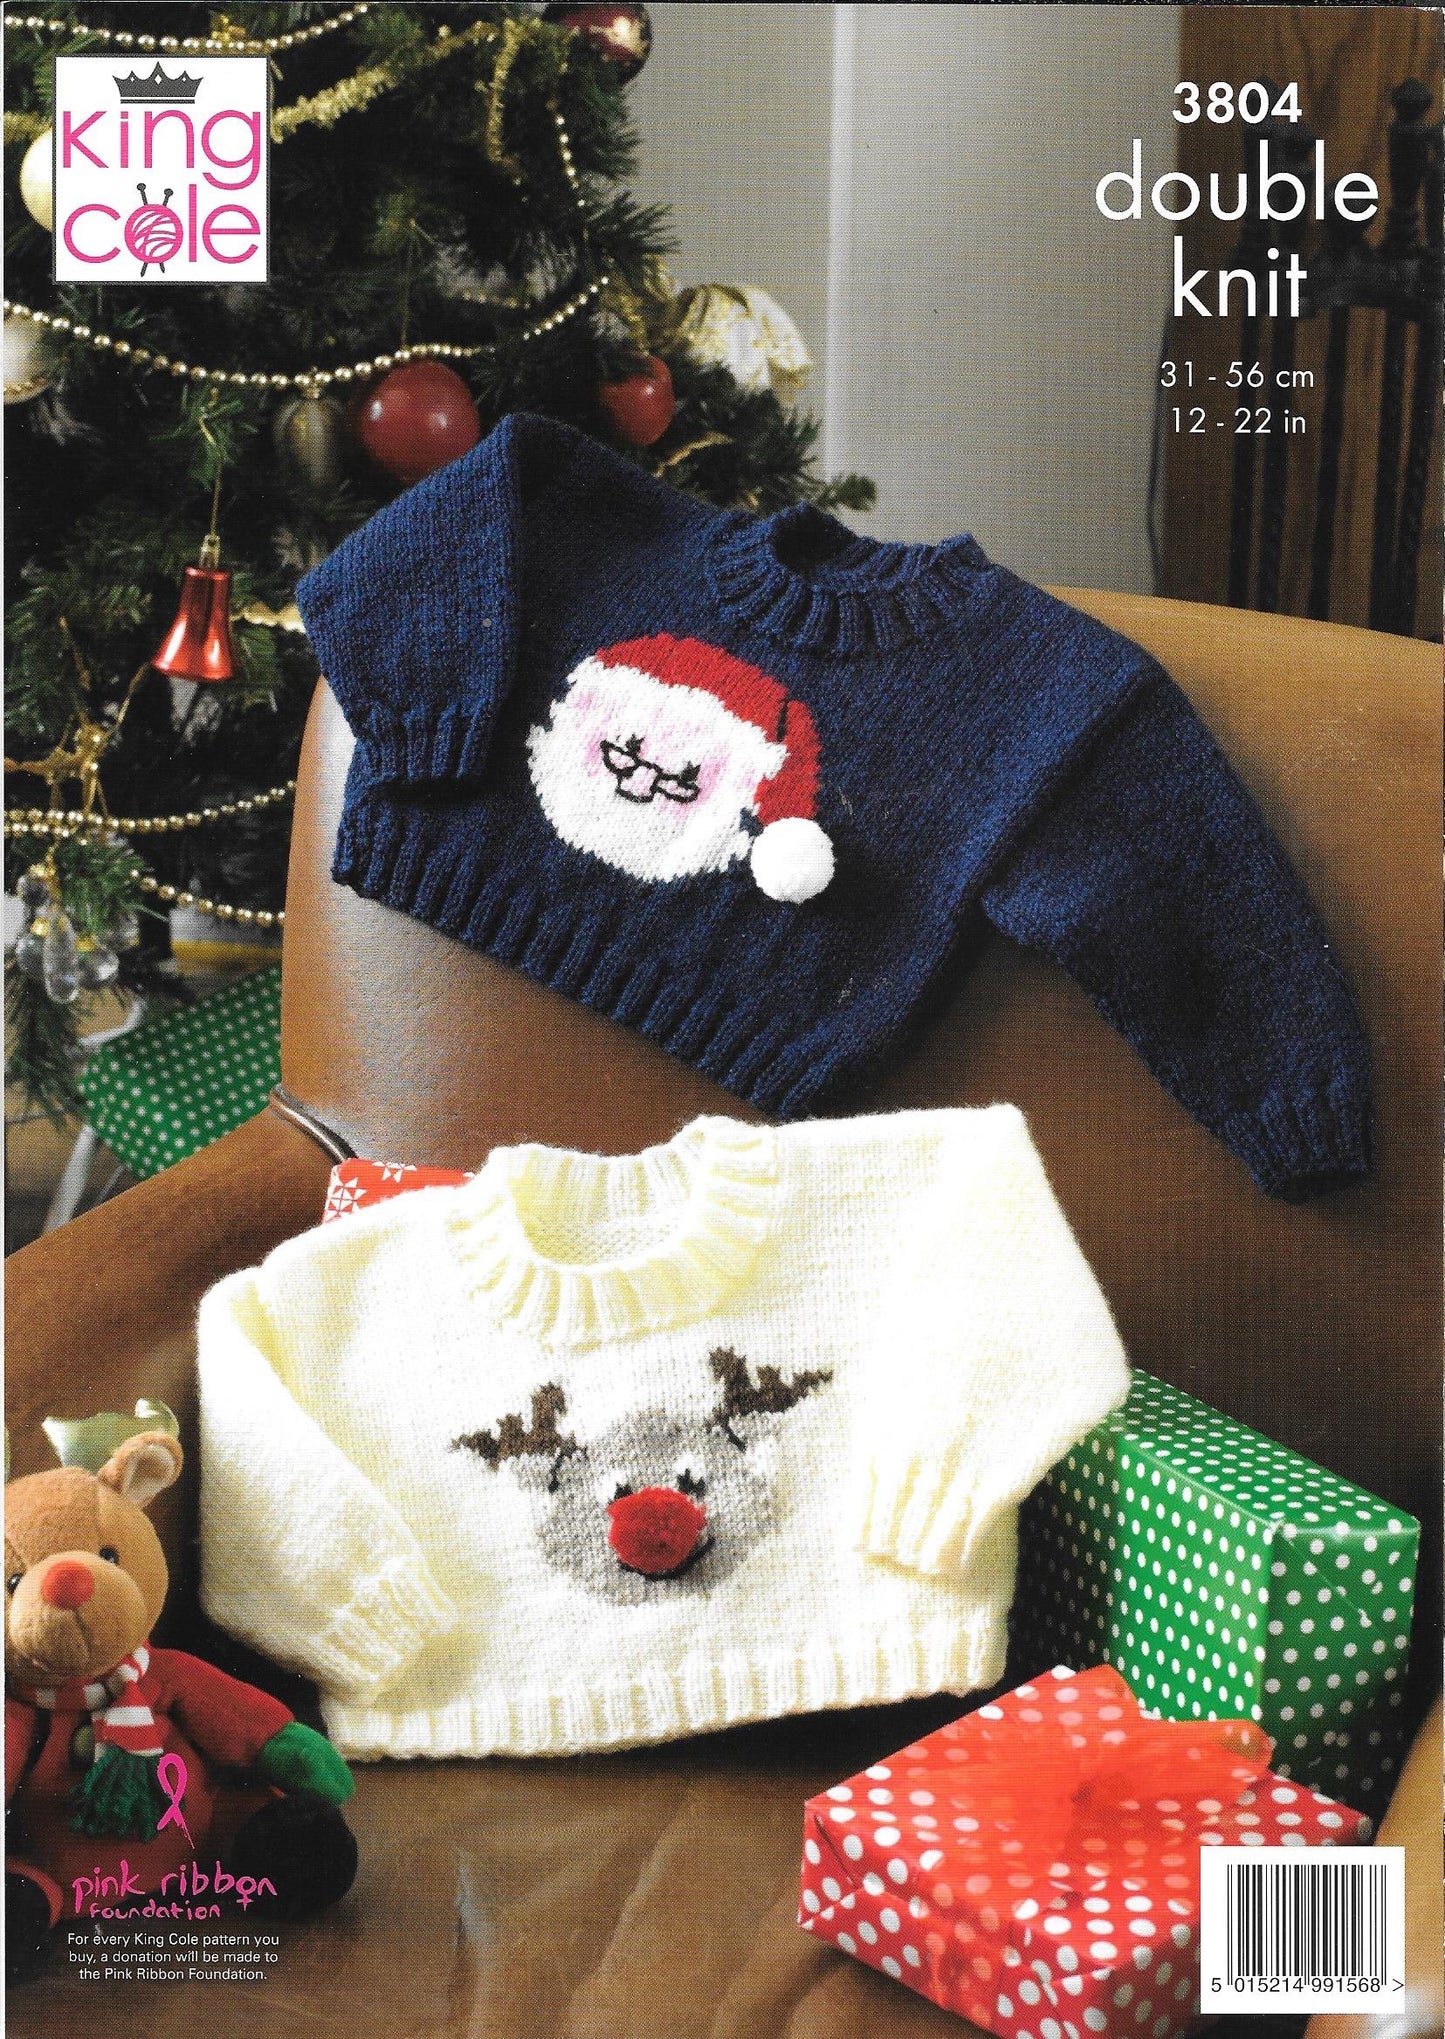 3804 King Cole Comfort dk baby - child Santa Sweater and Rudolph sweater knitting pattern